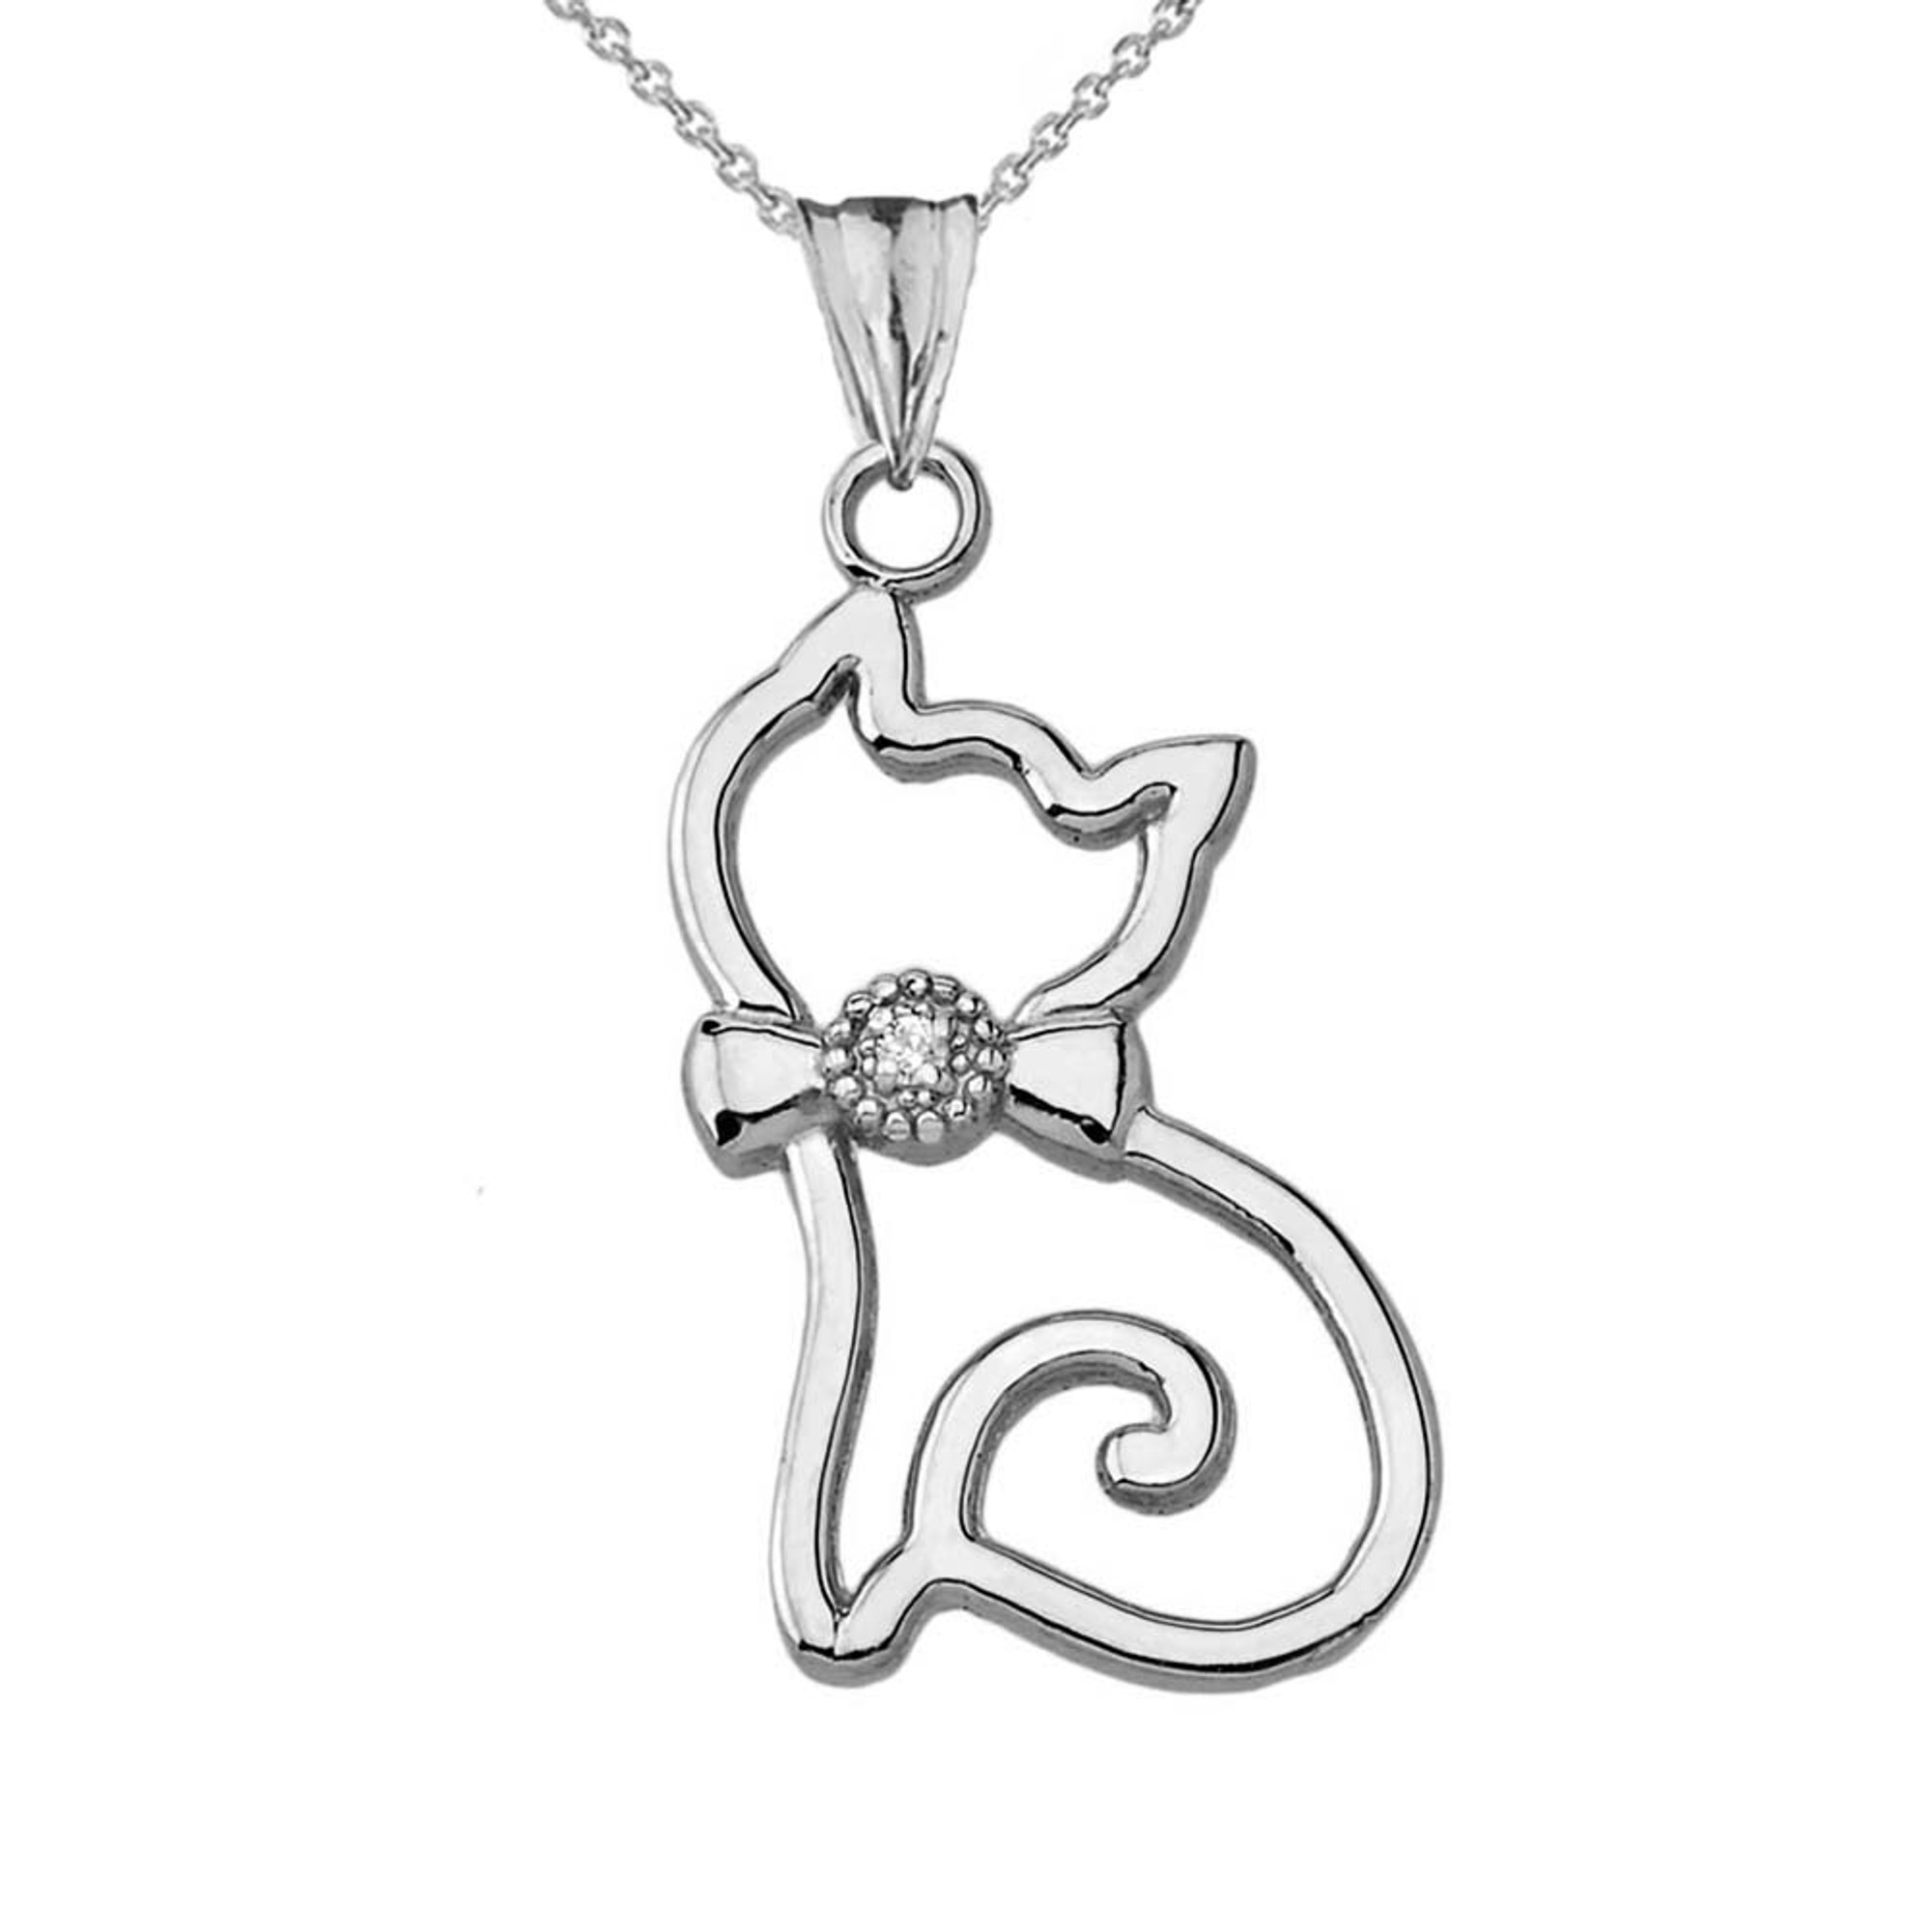 Openwork Diamond Cat Pendant Necklace in Sterling Silver